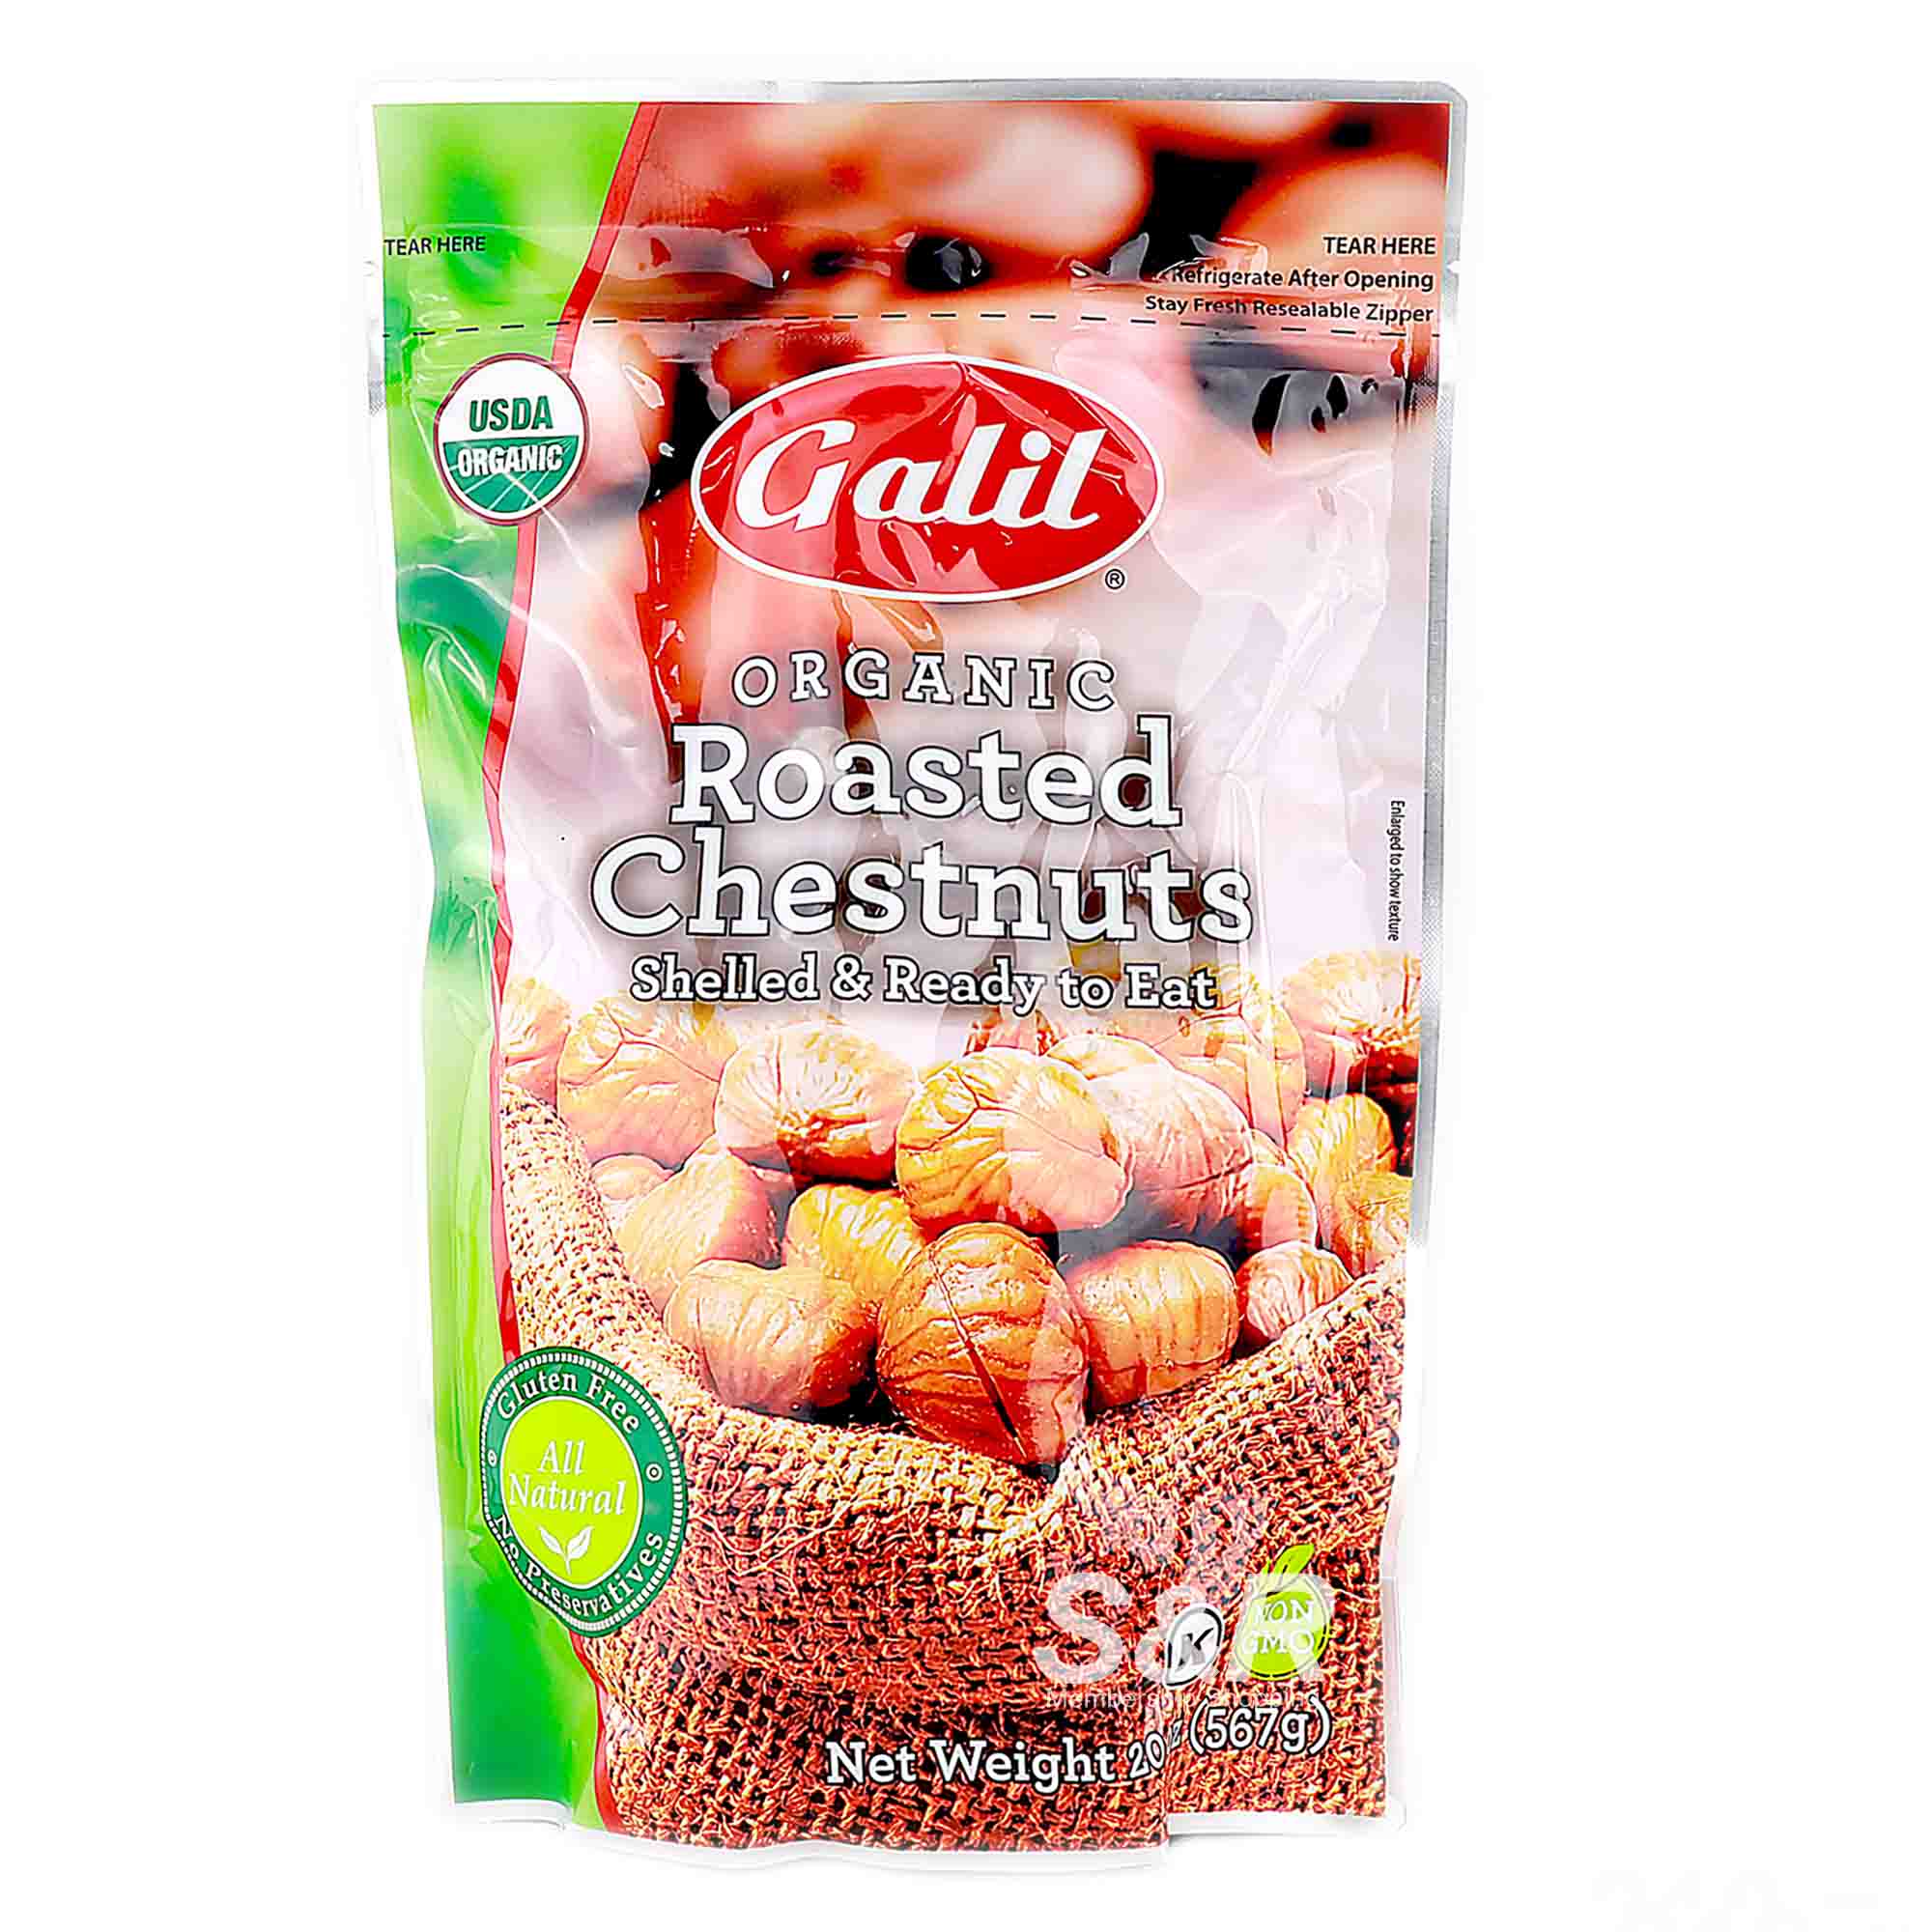 Galil Organic Roasted Chestnuts Shelled and Ready to Eat 567g